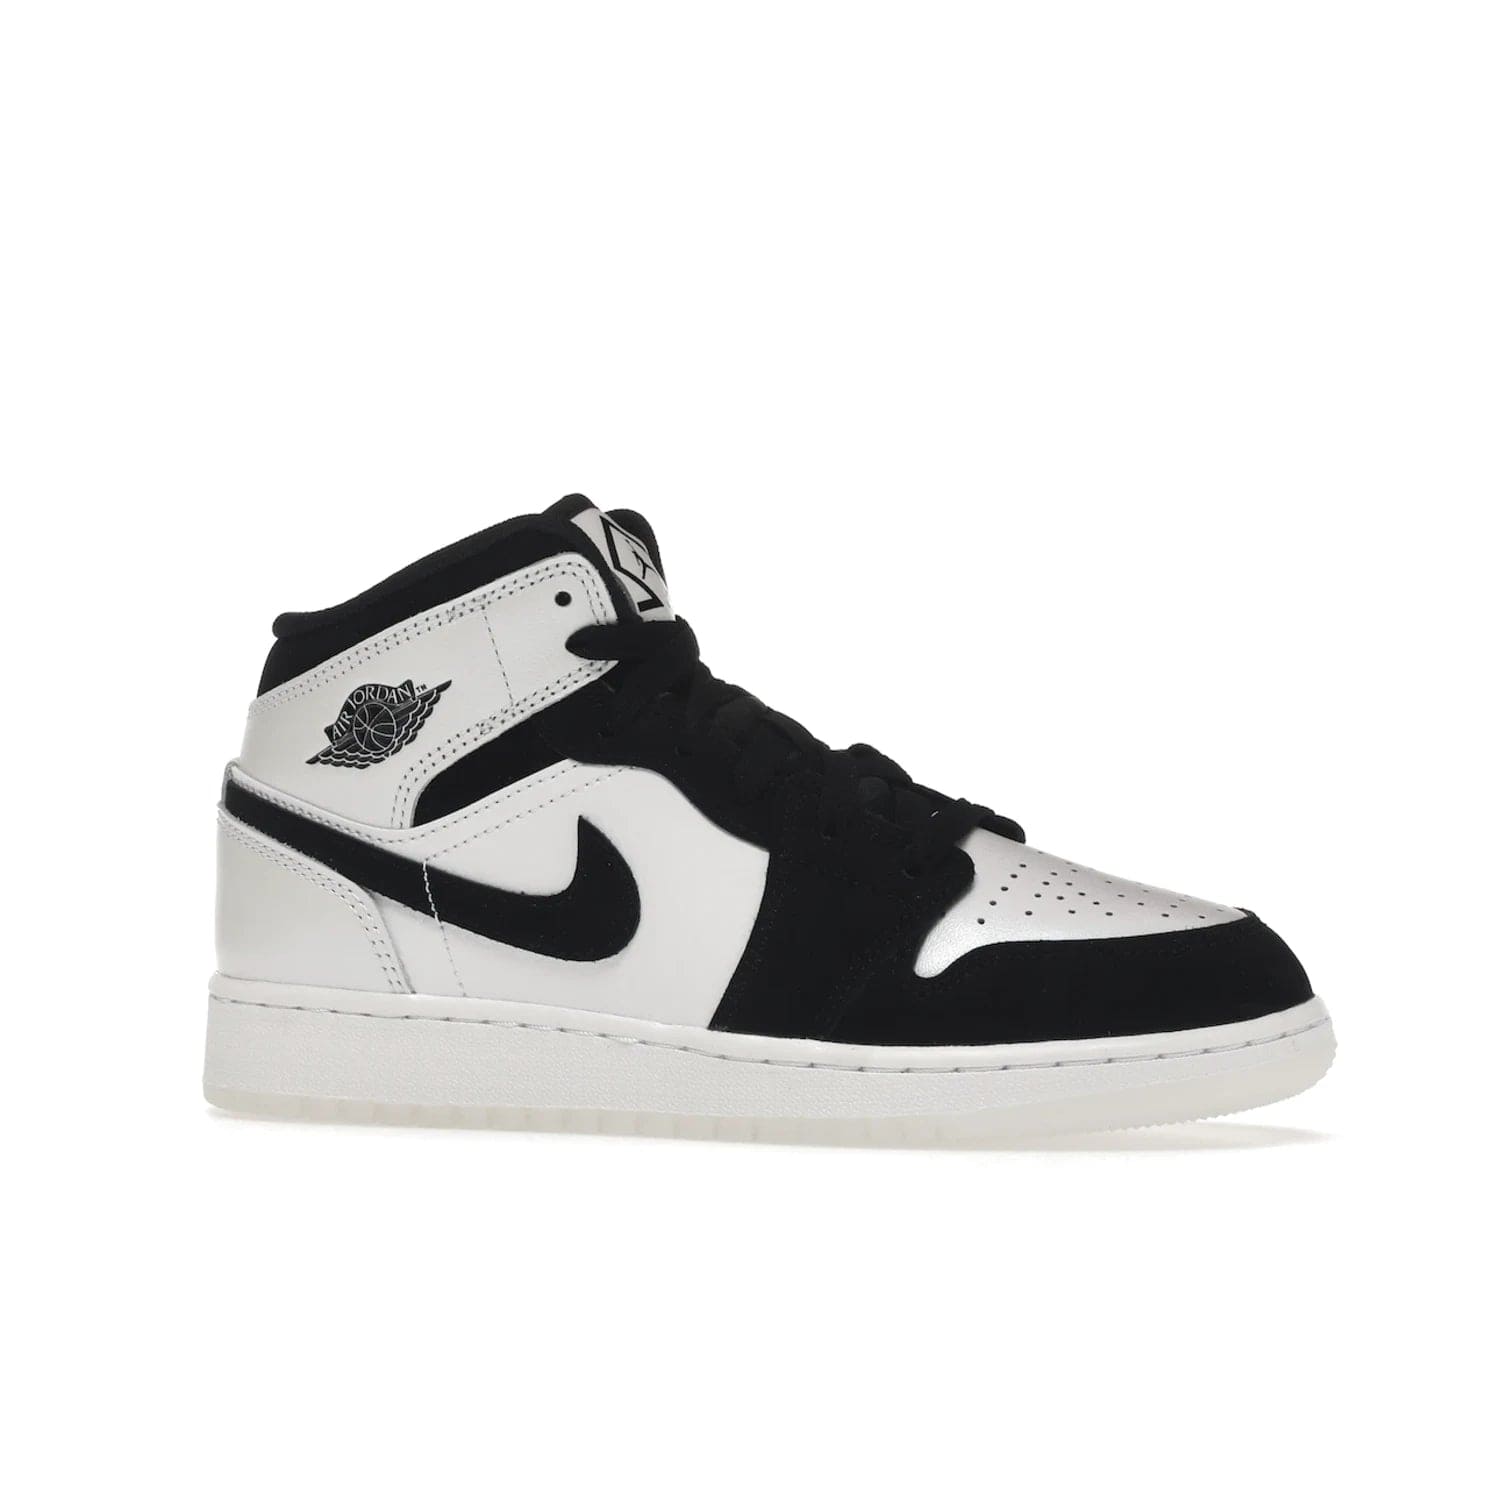 Jordan 1 Mid Diamond Shorts (GS) - Image 3 - Only at www.BallersClubKickz.com - Get the Jordan 1 Mid Diamond Shorts GS on 9th Feb 2022! Features a white, black & suede design with nylon tongue, stamped wings logo, rubber midsole & outsole. Only $100!